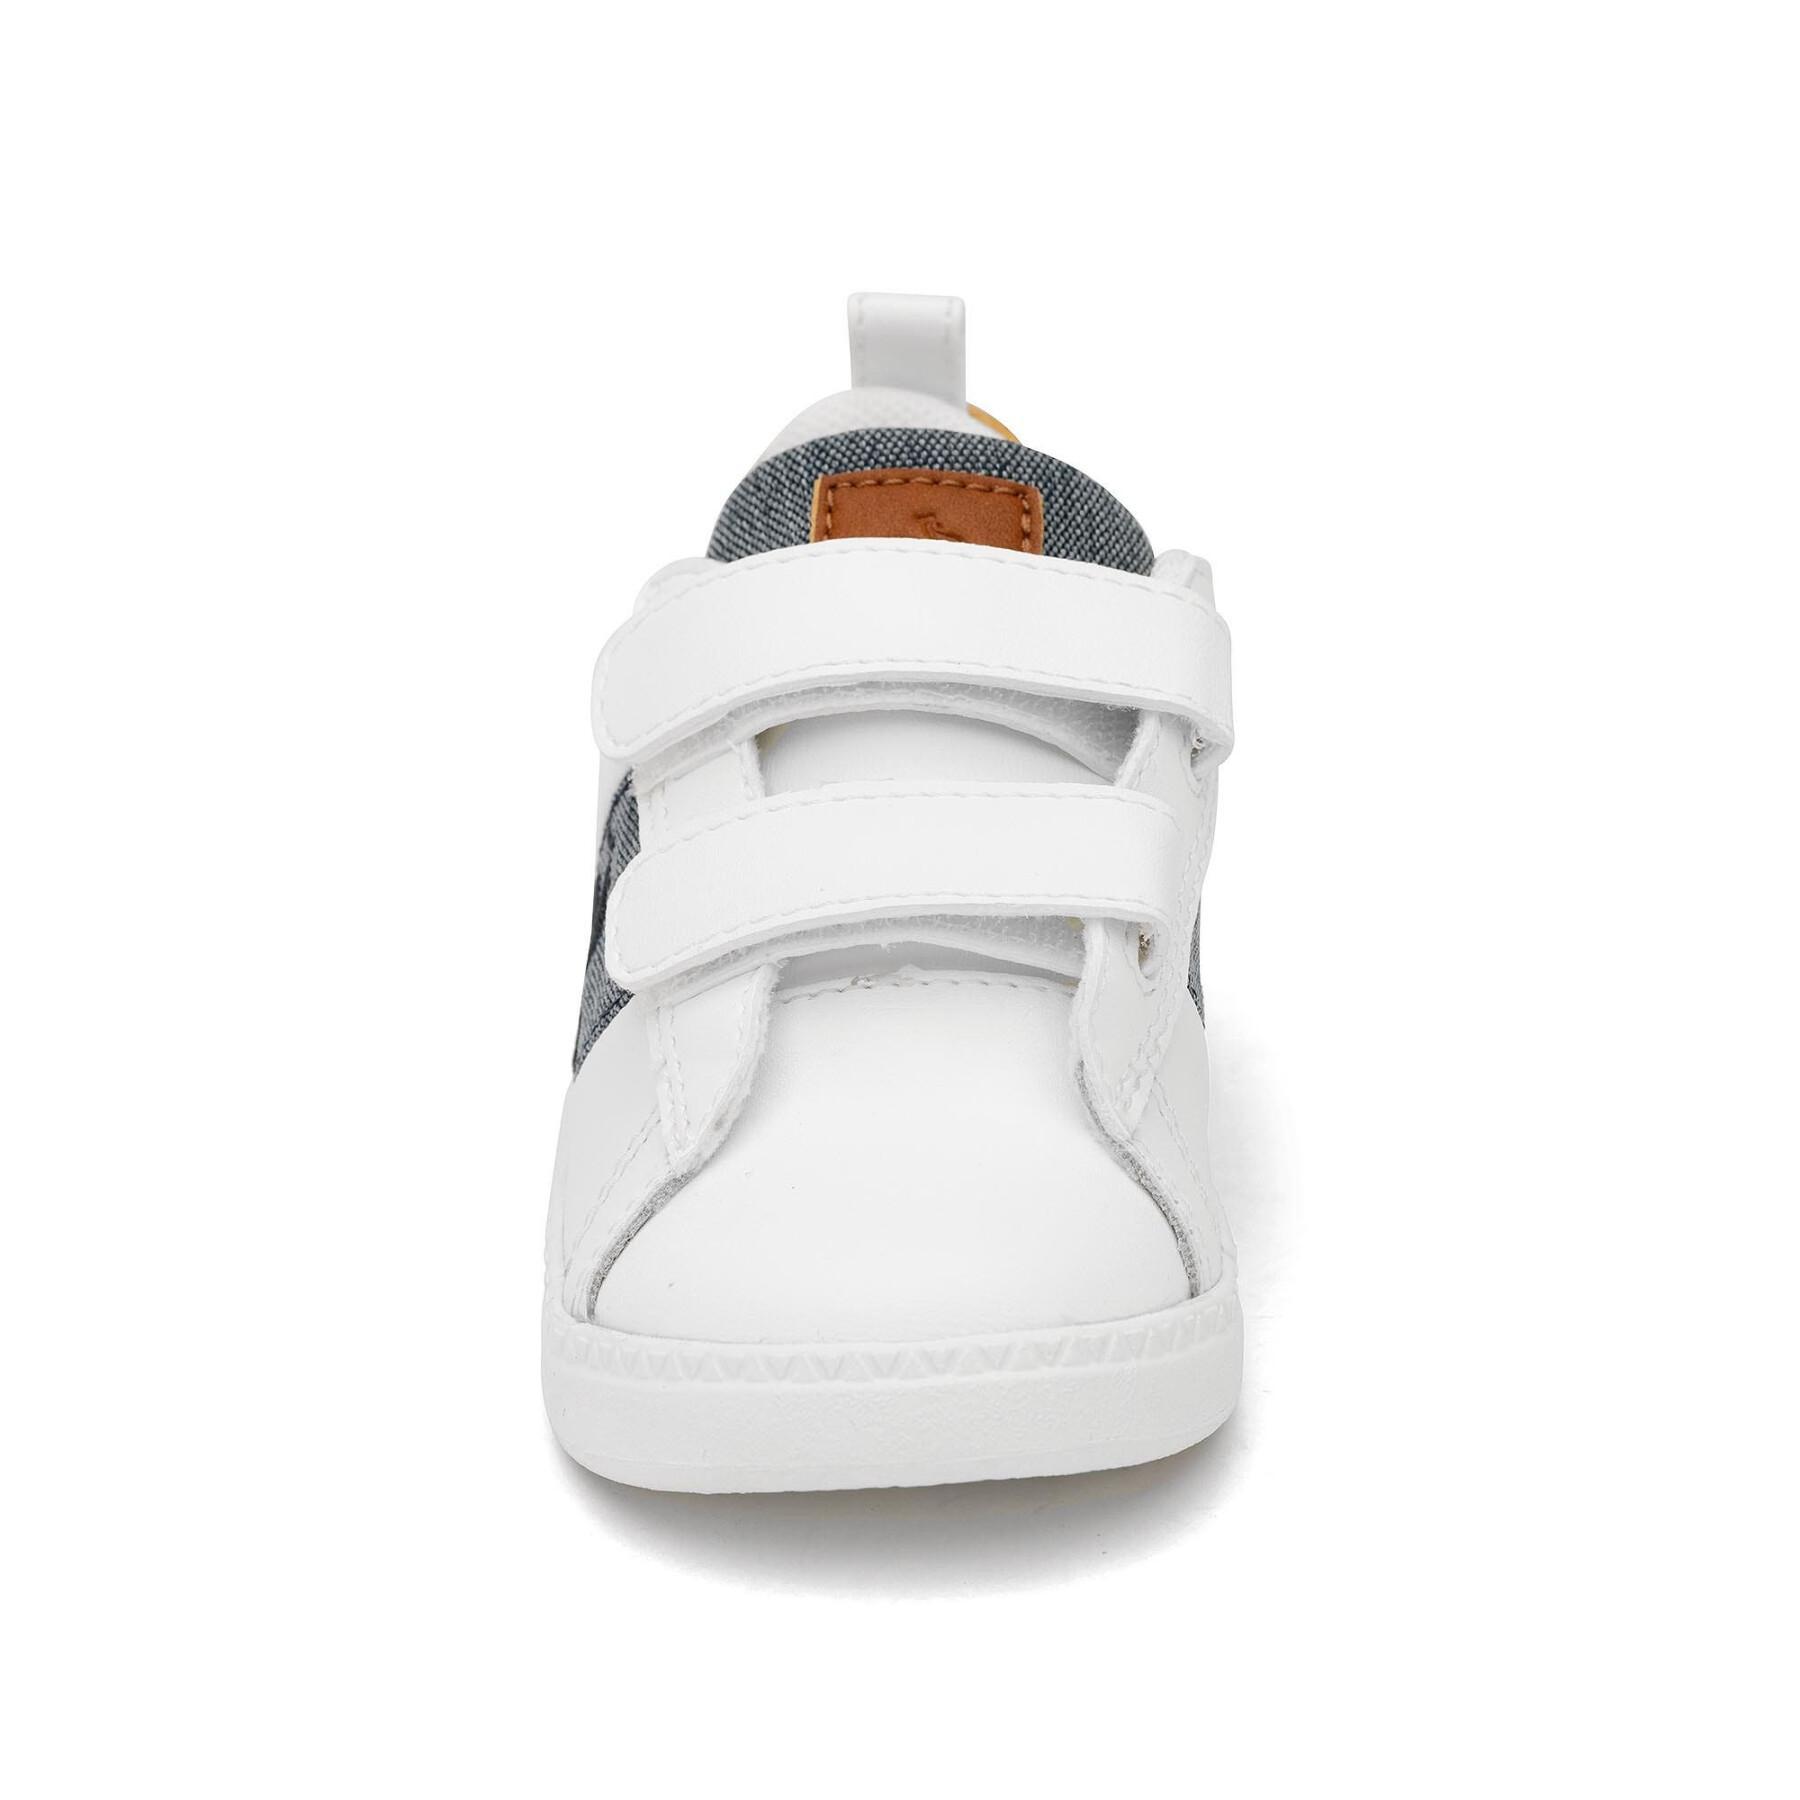 Children's sneakers Le Coq Sportif Courtclassic Inf Workwear